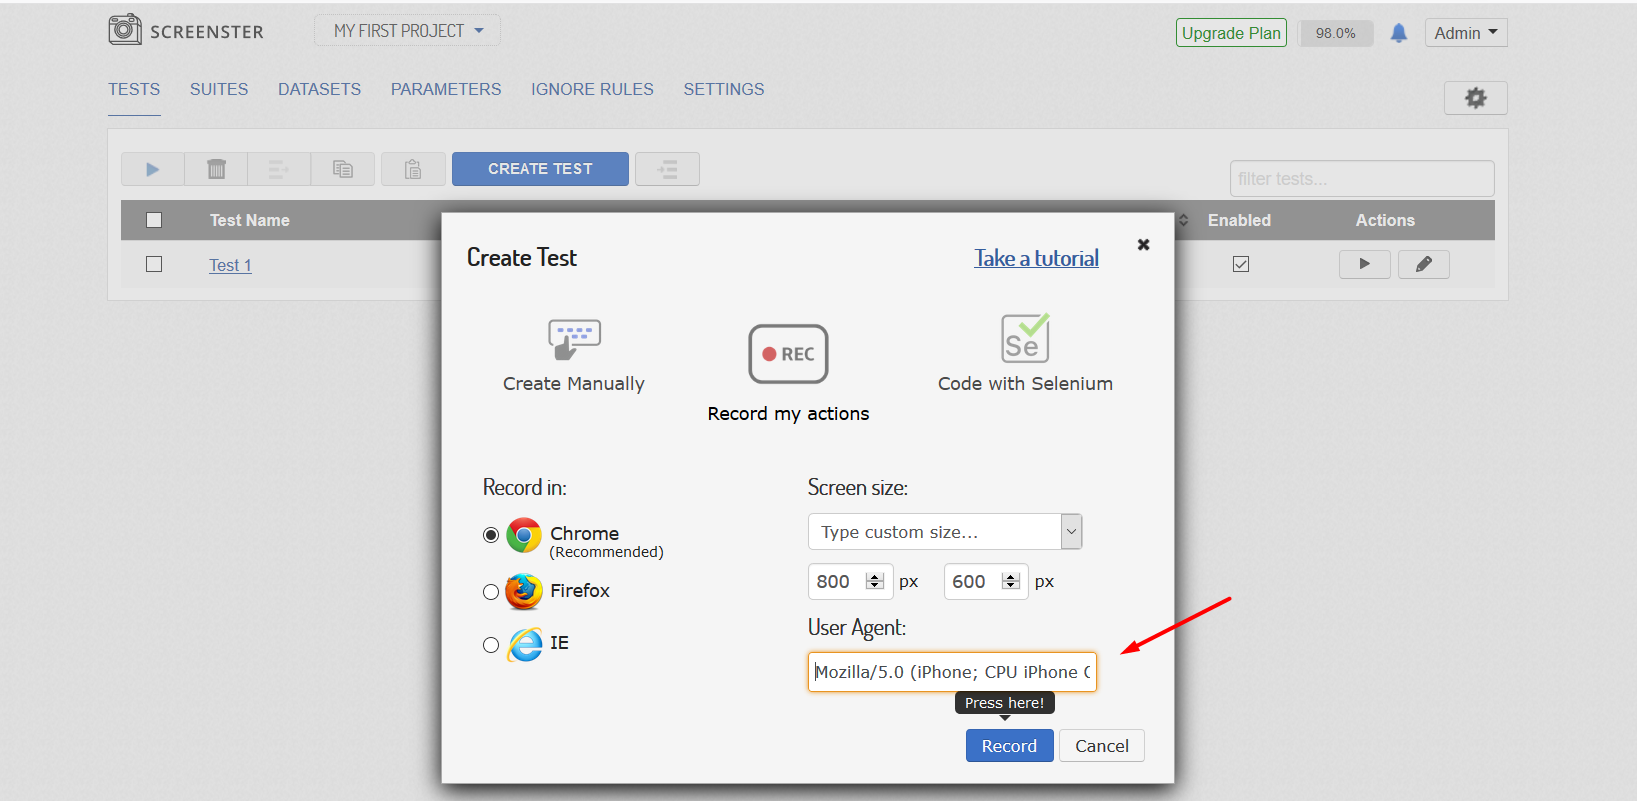 Visual Regression Testing: Mobile Client